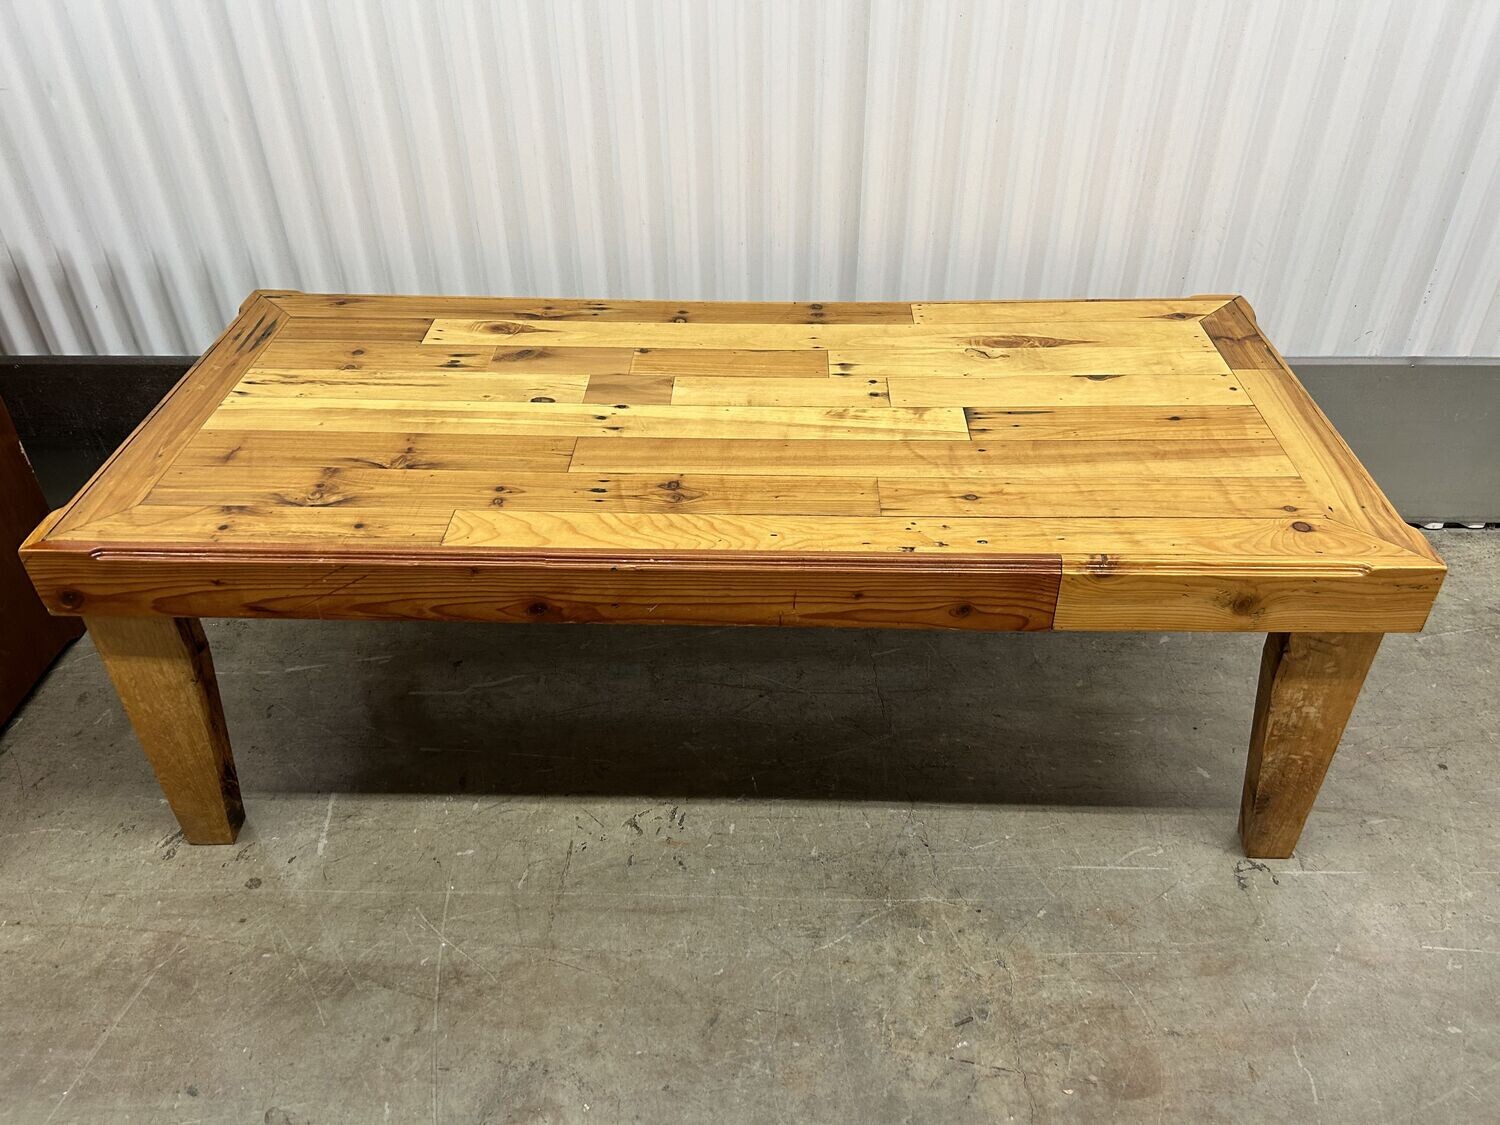 Rustic &quot;Pallet&quot; Coffee Table, sturdy! #2009 ** 3 wks. to sell, full price